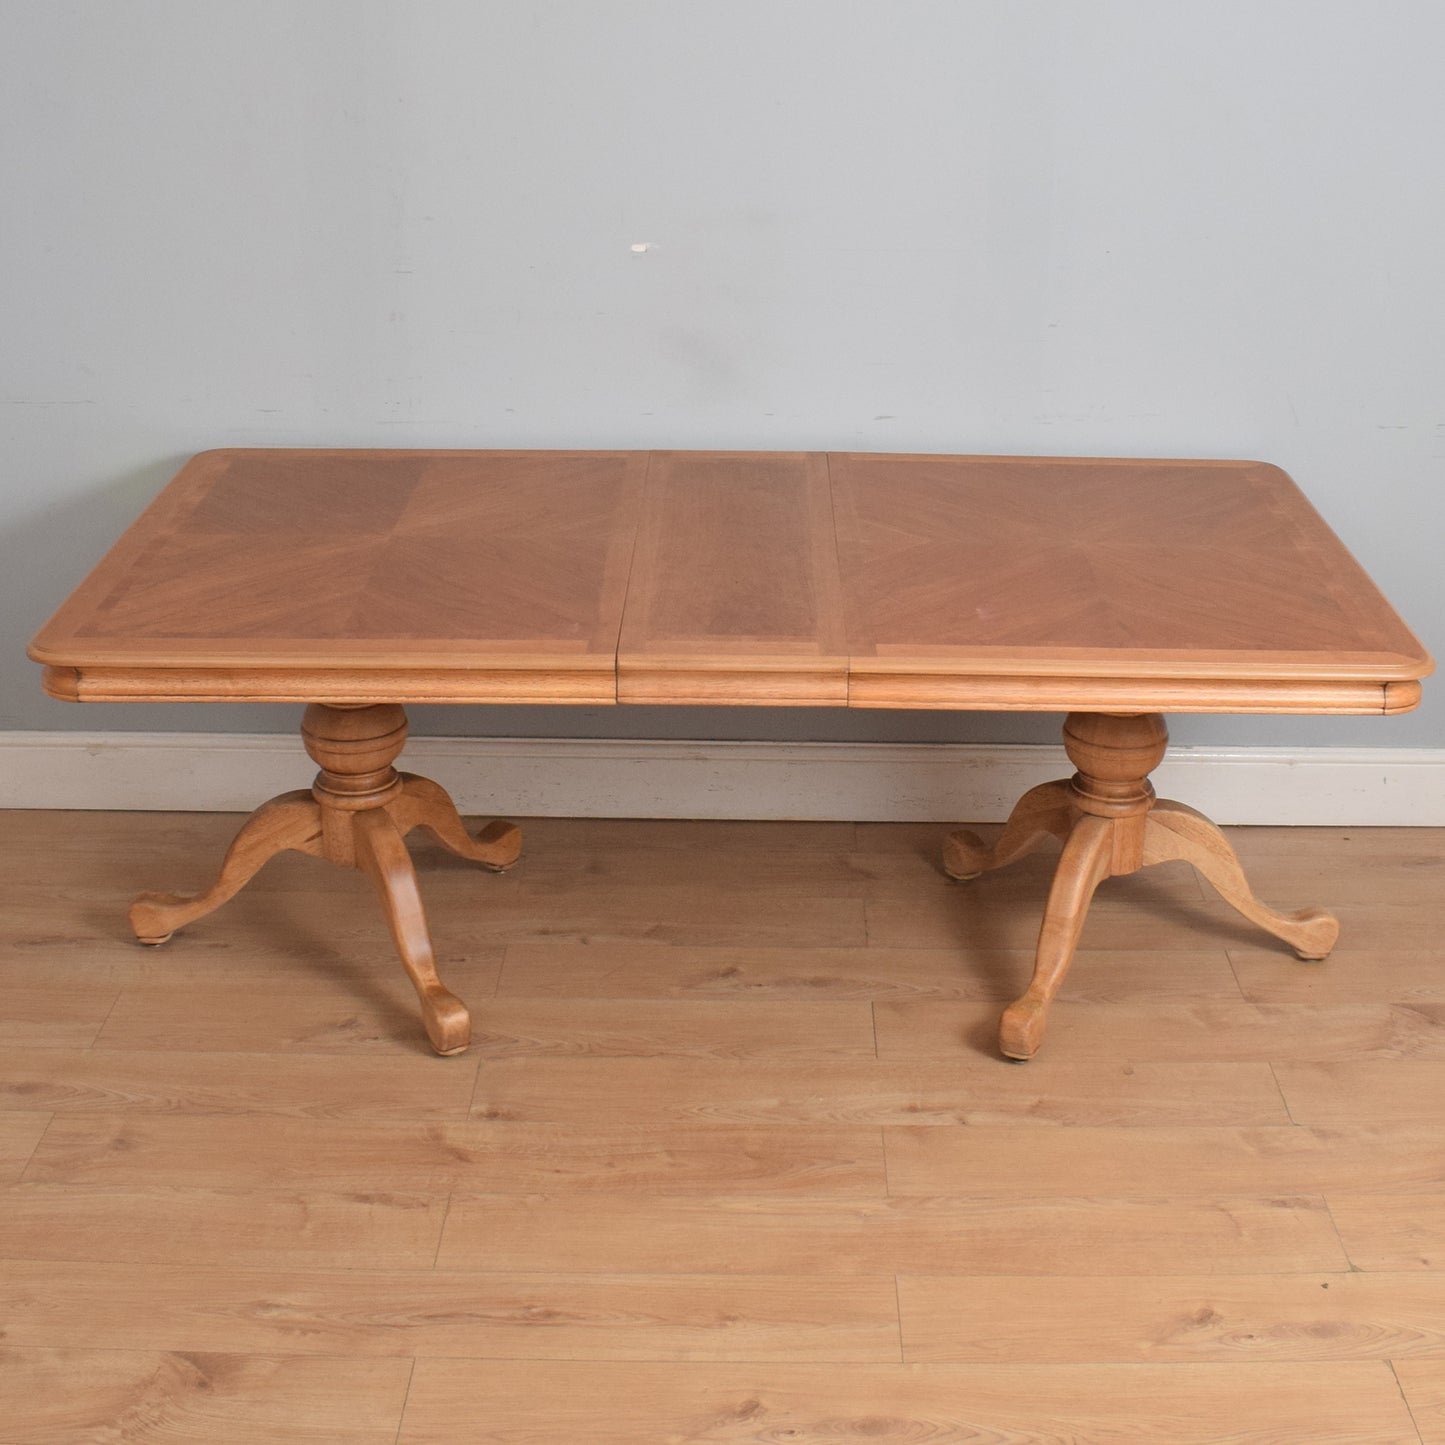 Restored Table and Six Chairs